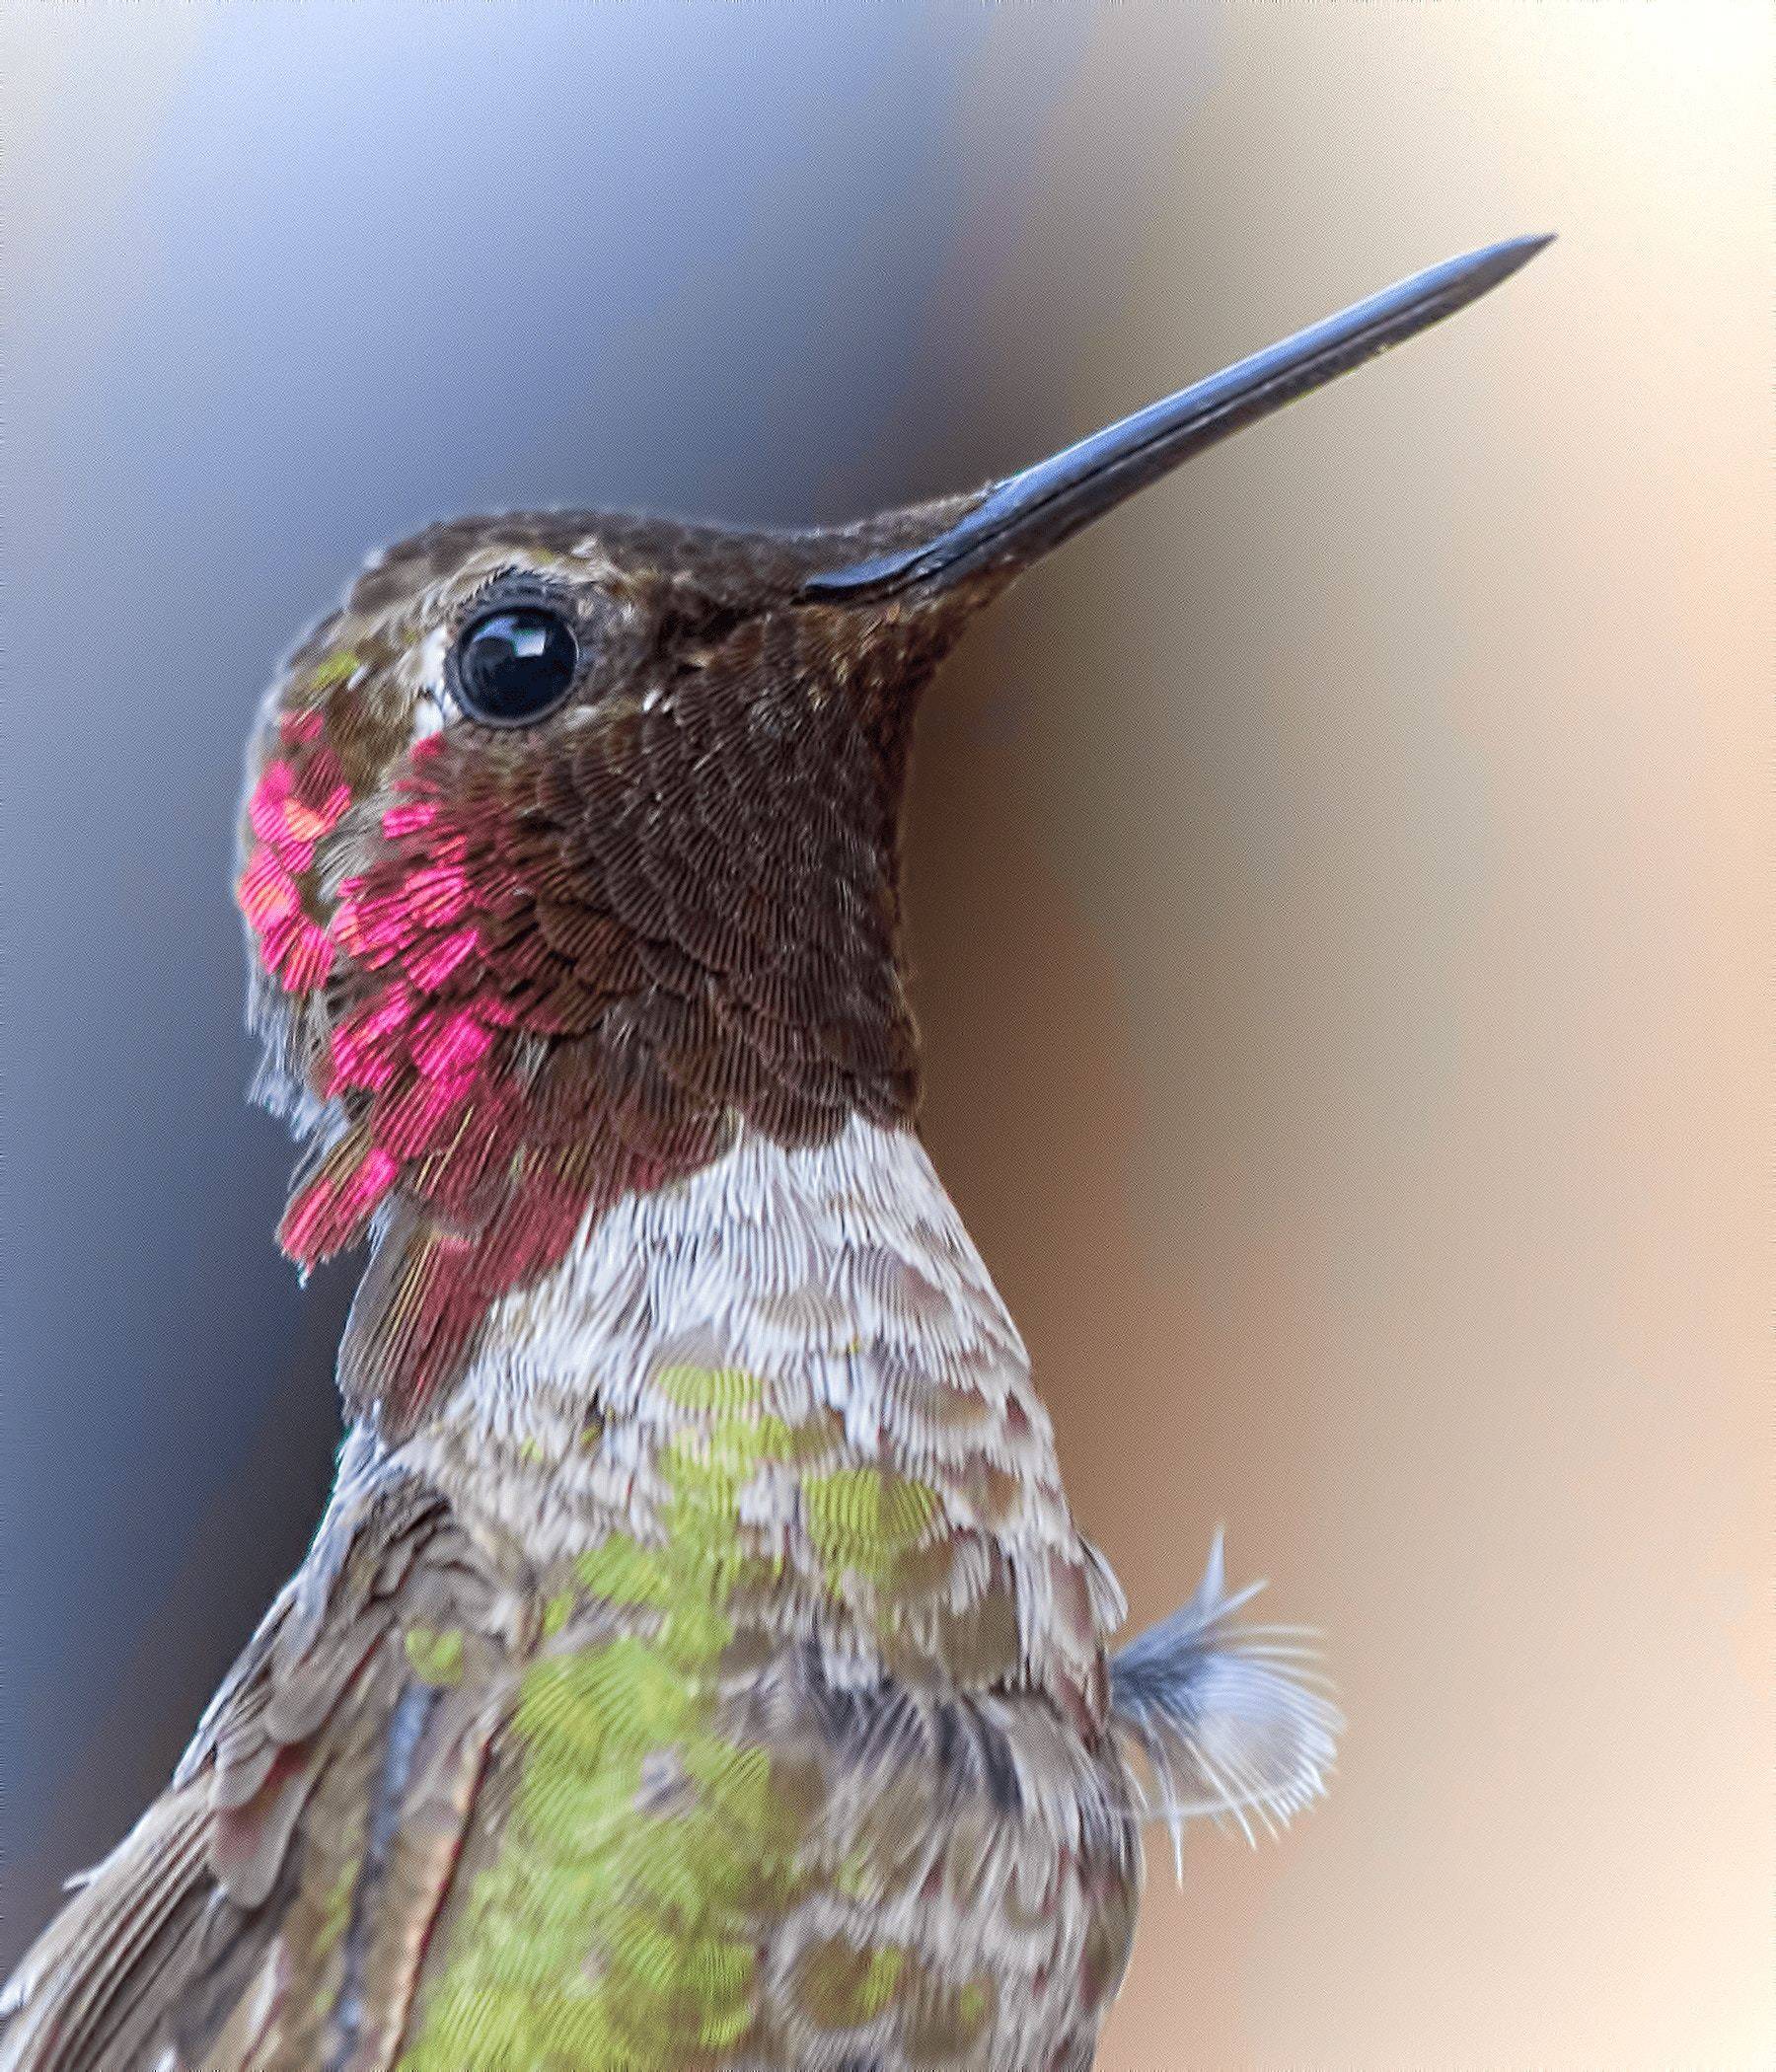 A hummingbird with it's beak in the air, pink on its head and a green breast.